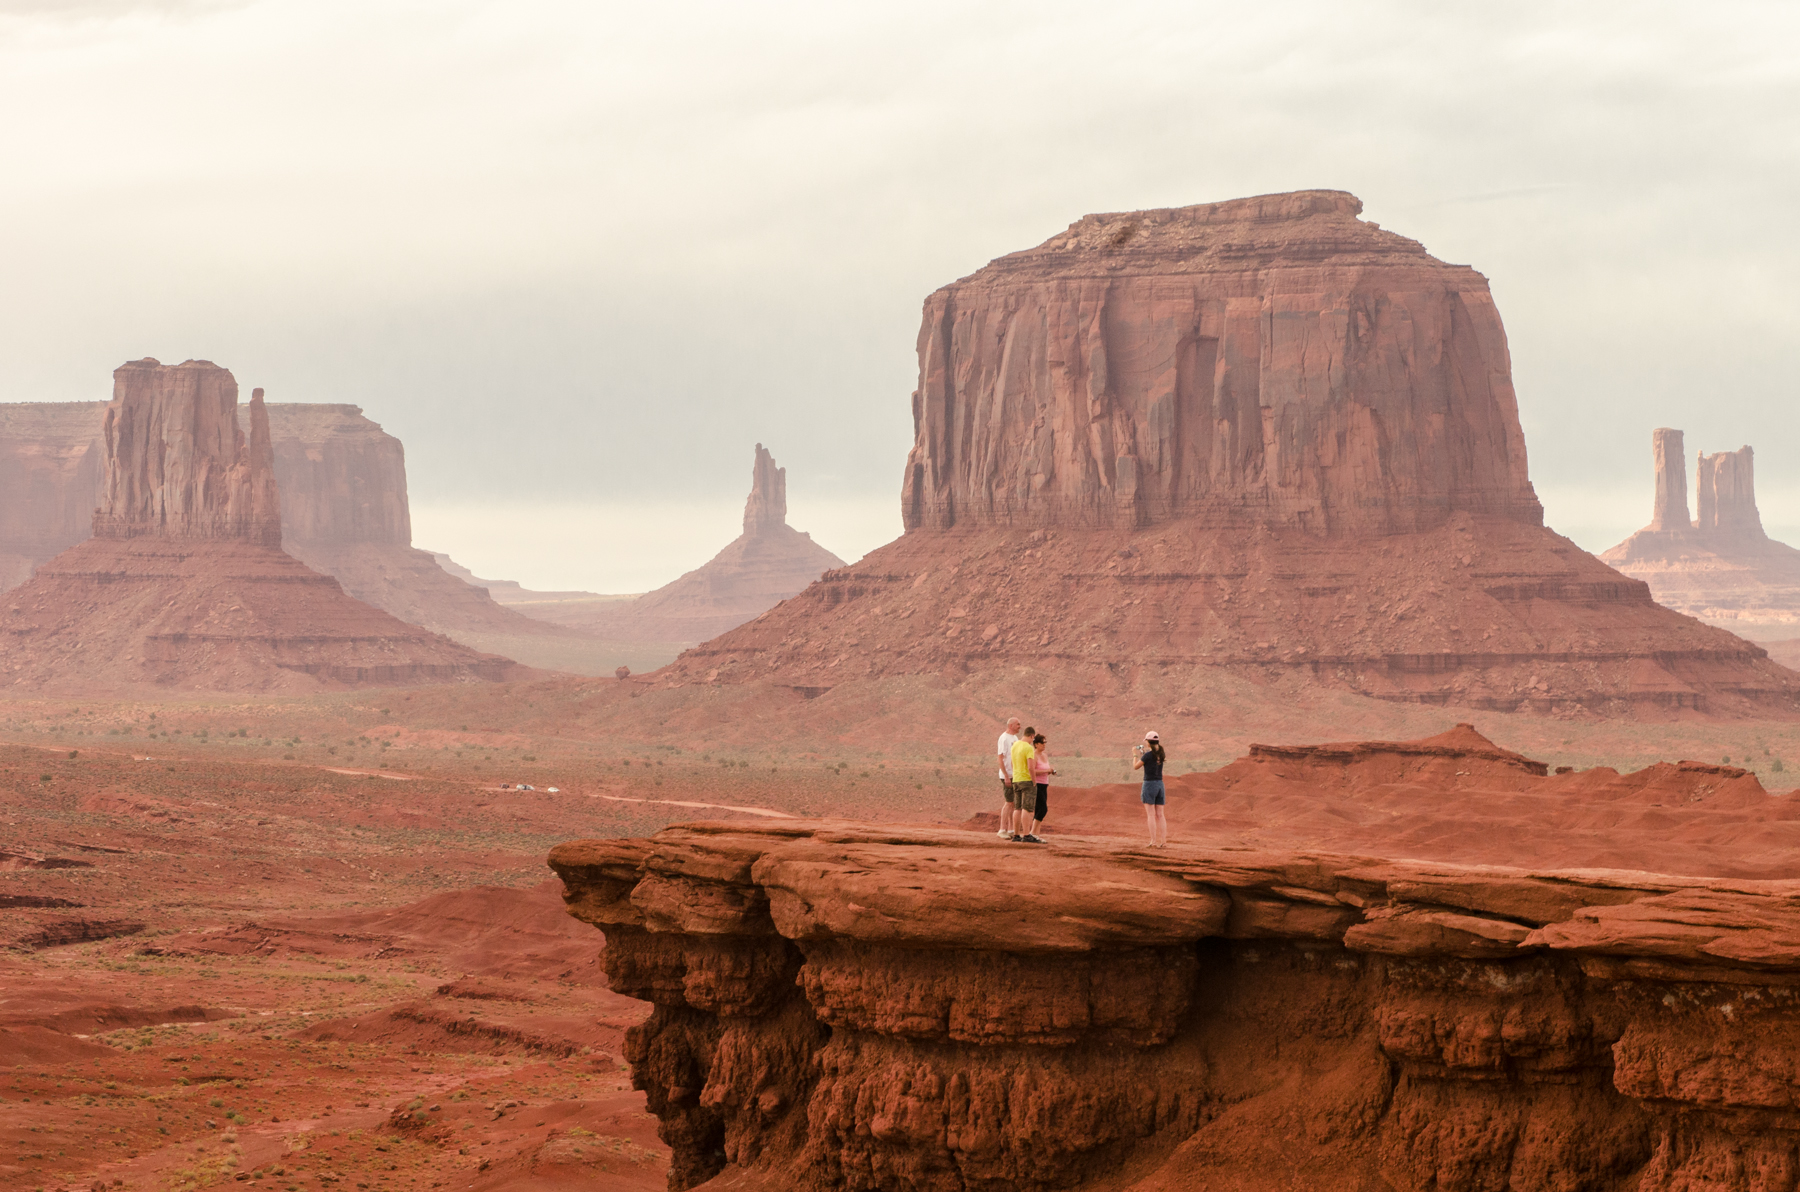 Monument Valley was spectacular, even in a dust storm so severe we could only see a few metres in front of us.